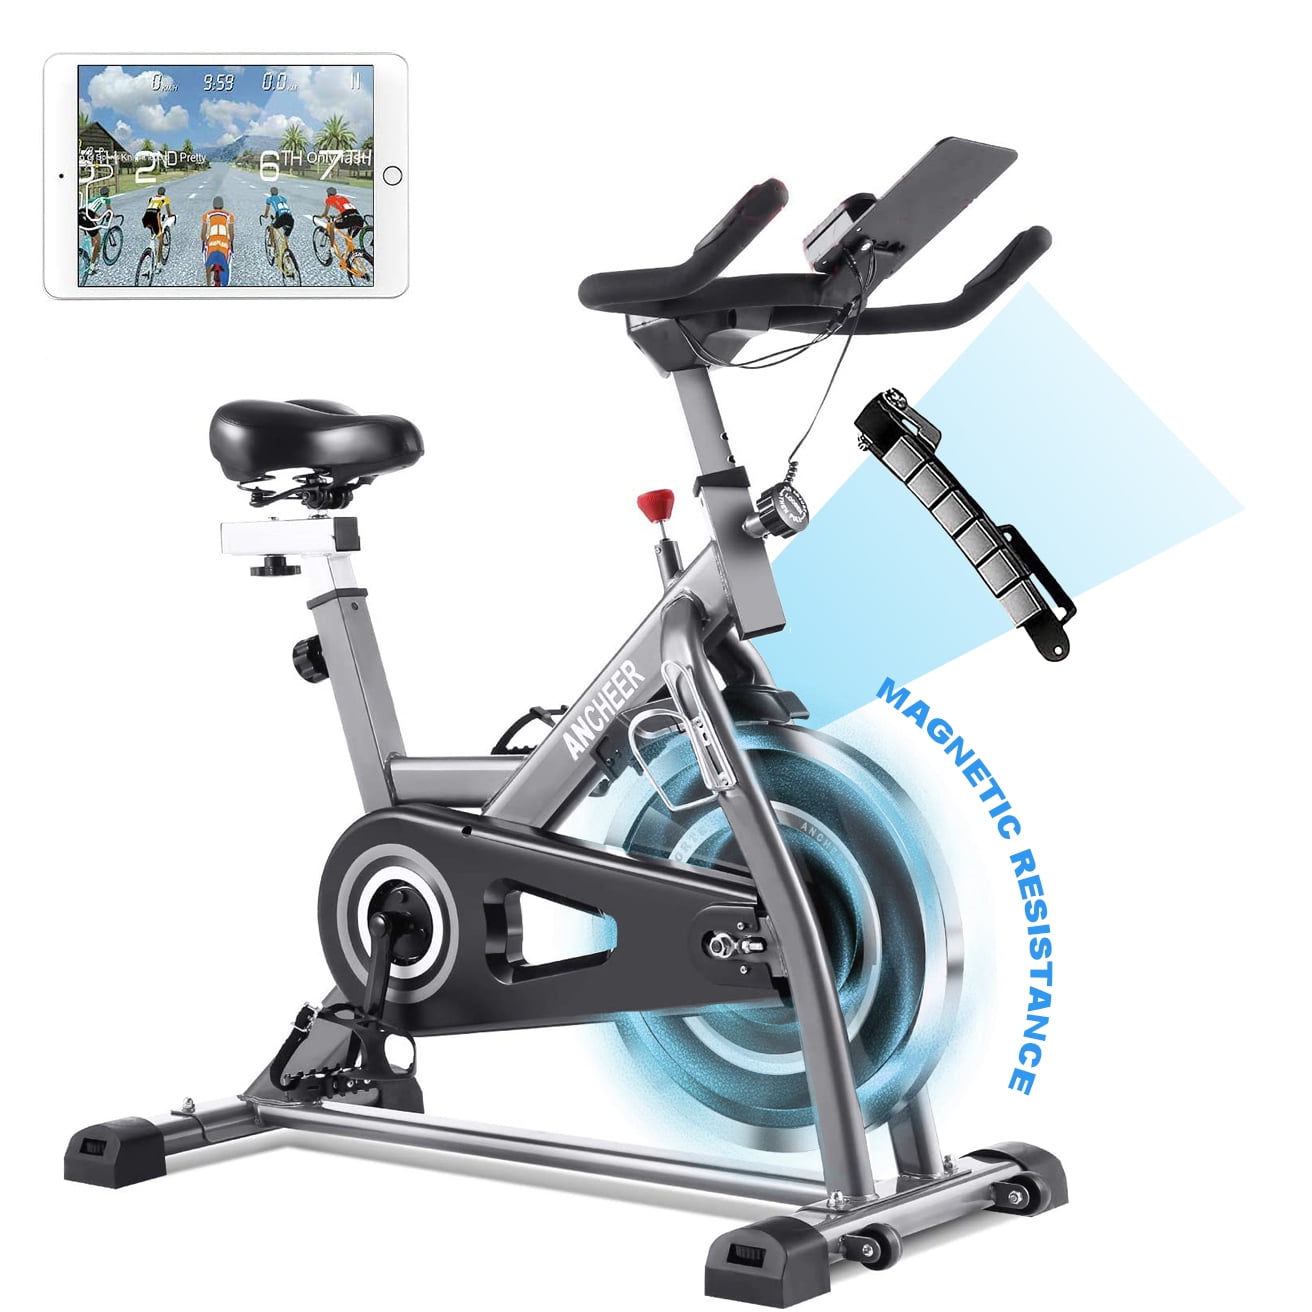 Details about   Indoor Home Exercise Bike Stationary Bicycle Cycling Cardio Fitness Workout Gym 